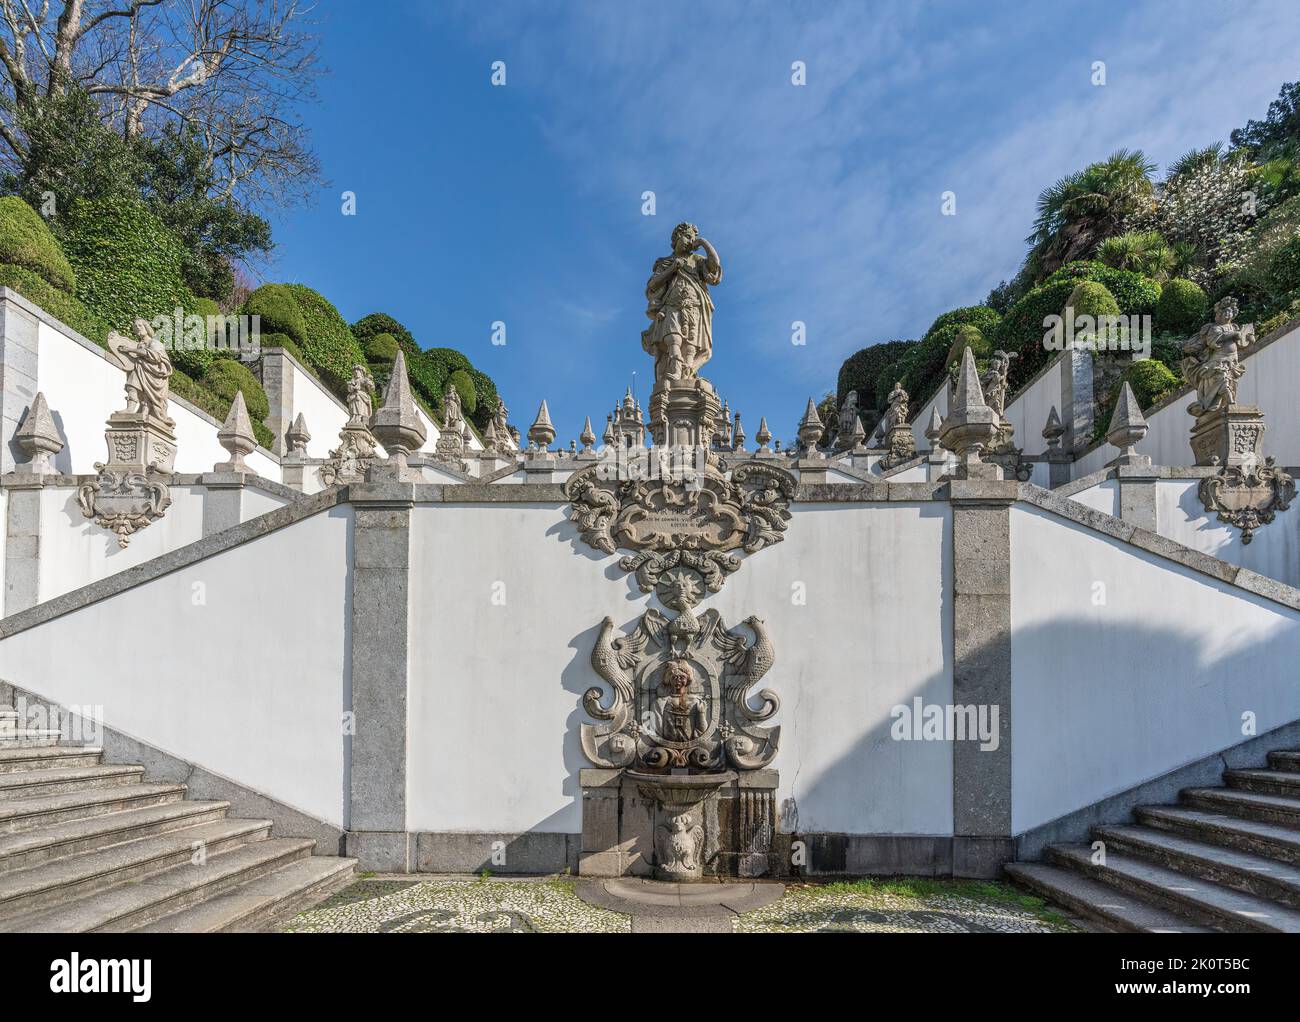 Sight Fountain and Vir Prudens Statue at Five Senses Stairway at Sanctuary of Bom Jesus do Monte - Braga, Portugal Stock Photo